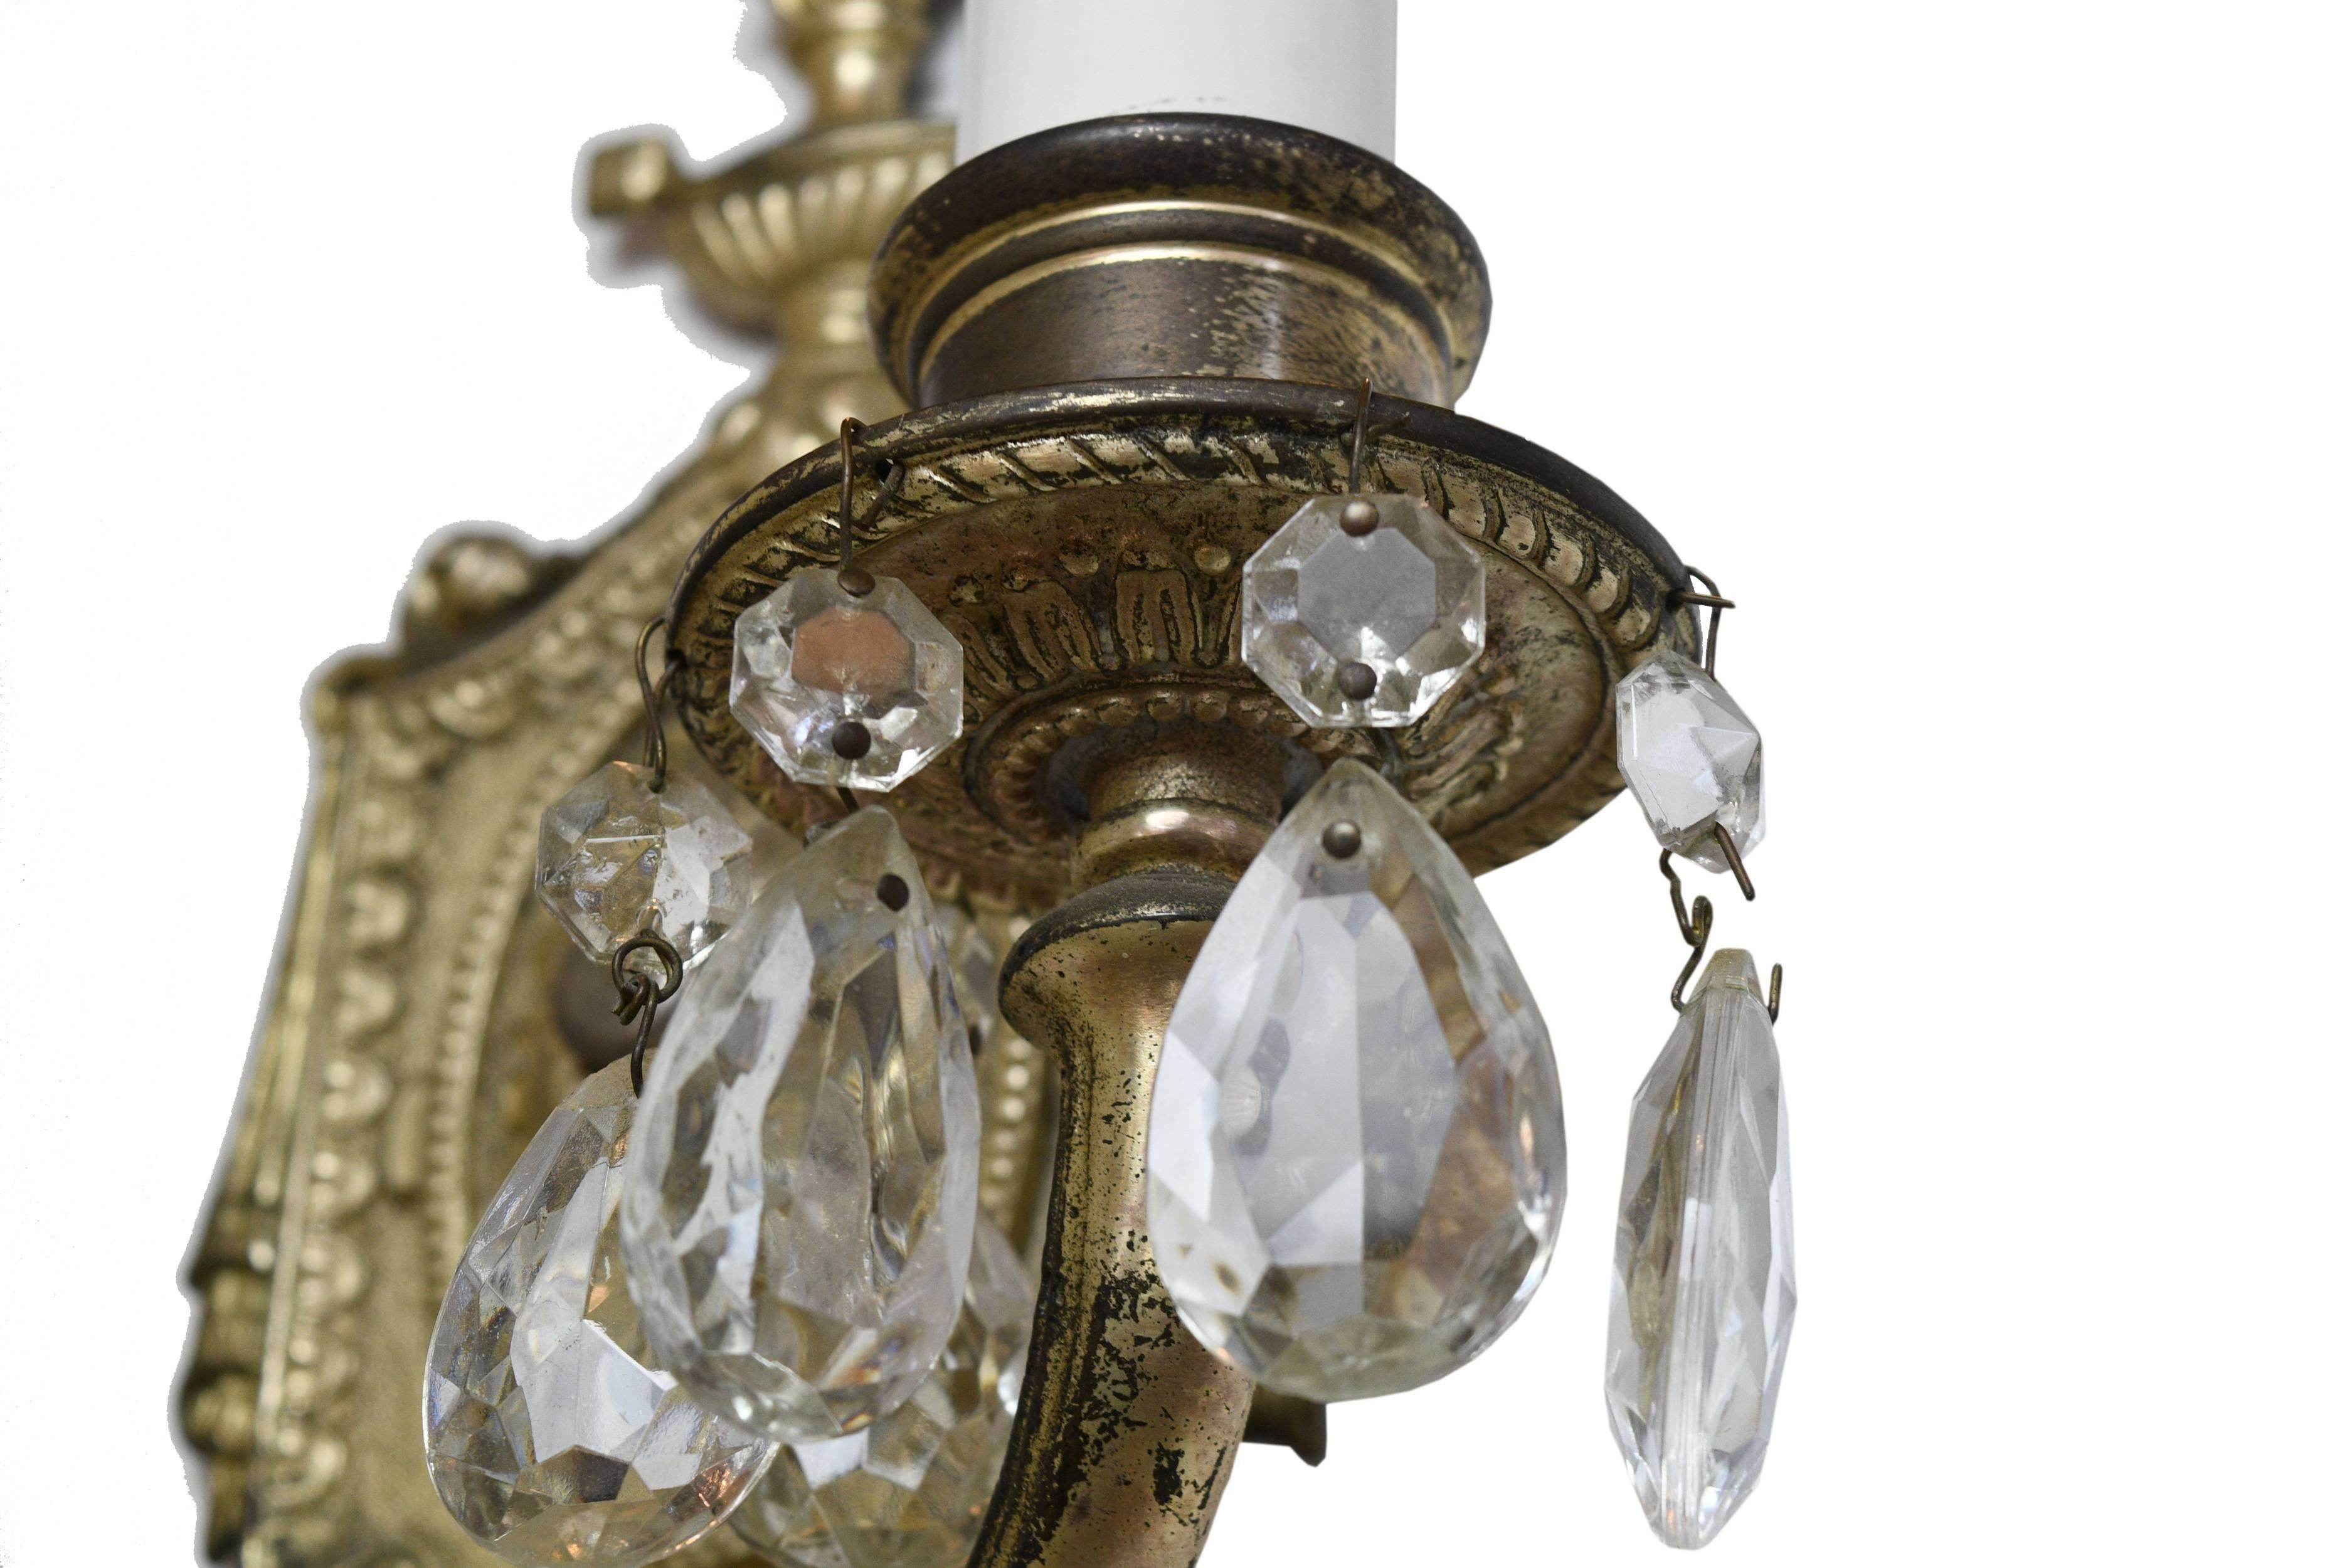 This two-arm silver over brass sconce features teardrop crystals on both arms and elegant detailing throughout. Perfect for adding that elegant, formal touch to any space. 

Measures: 12.75